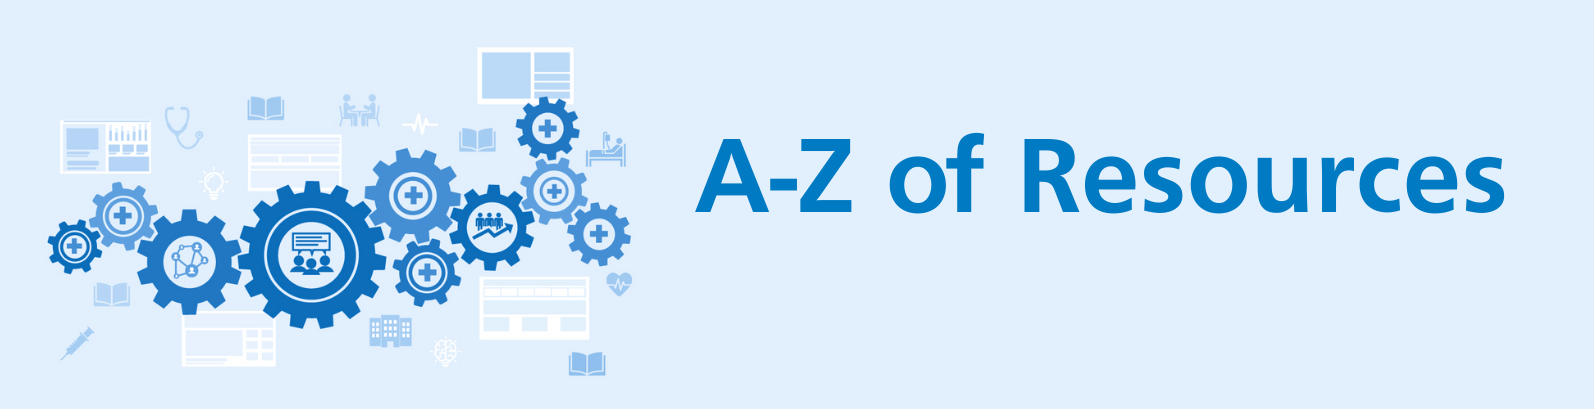 Left hand side icon image of cogs, right hand side text: A-Z of Resources 